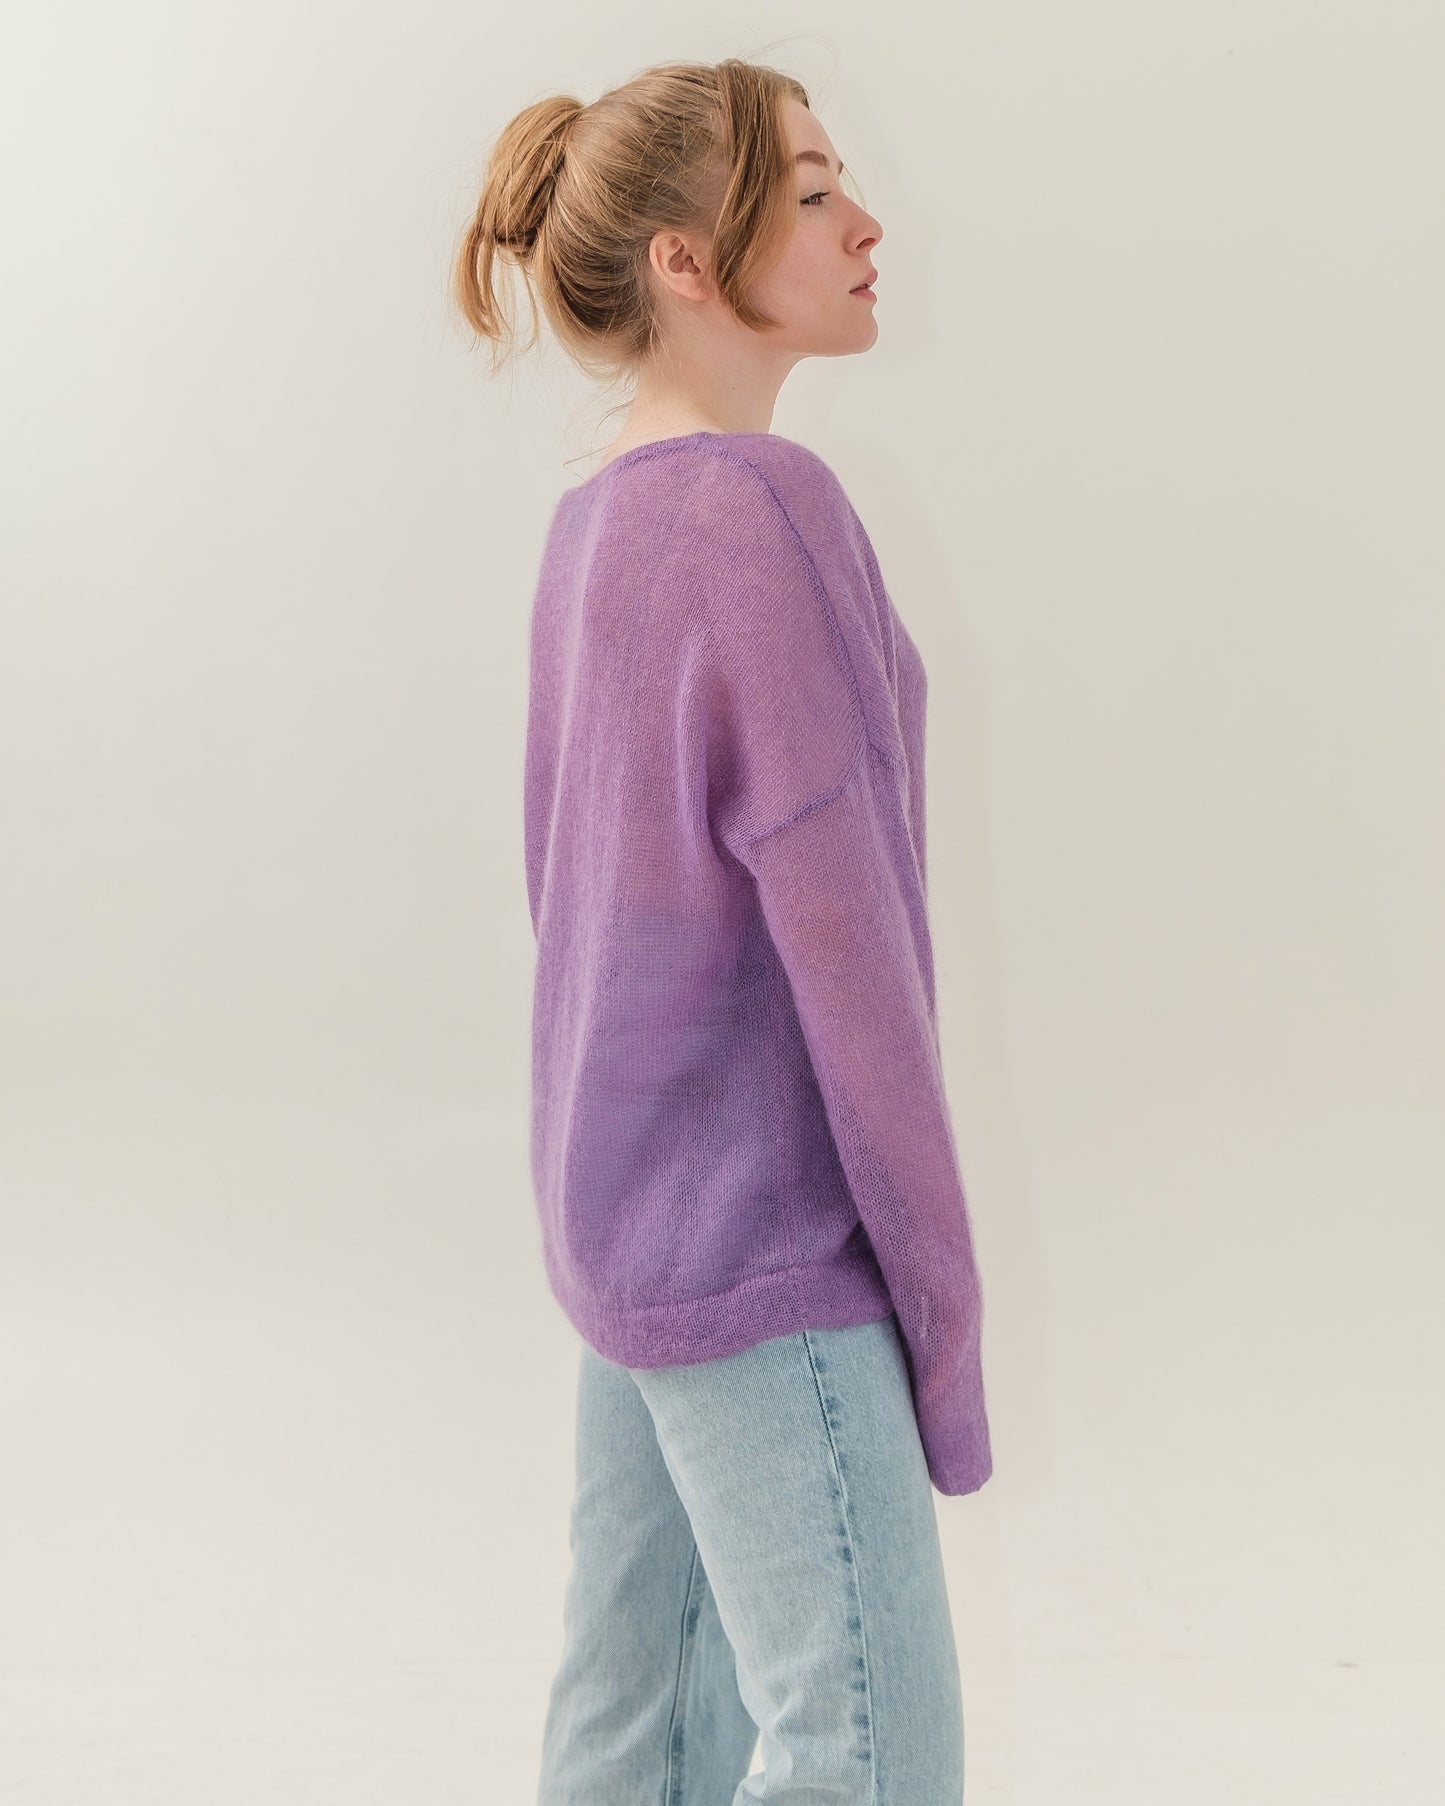 Lightweight sweater in lilac